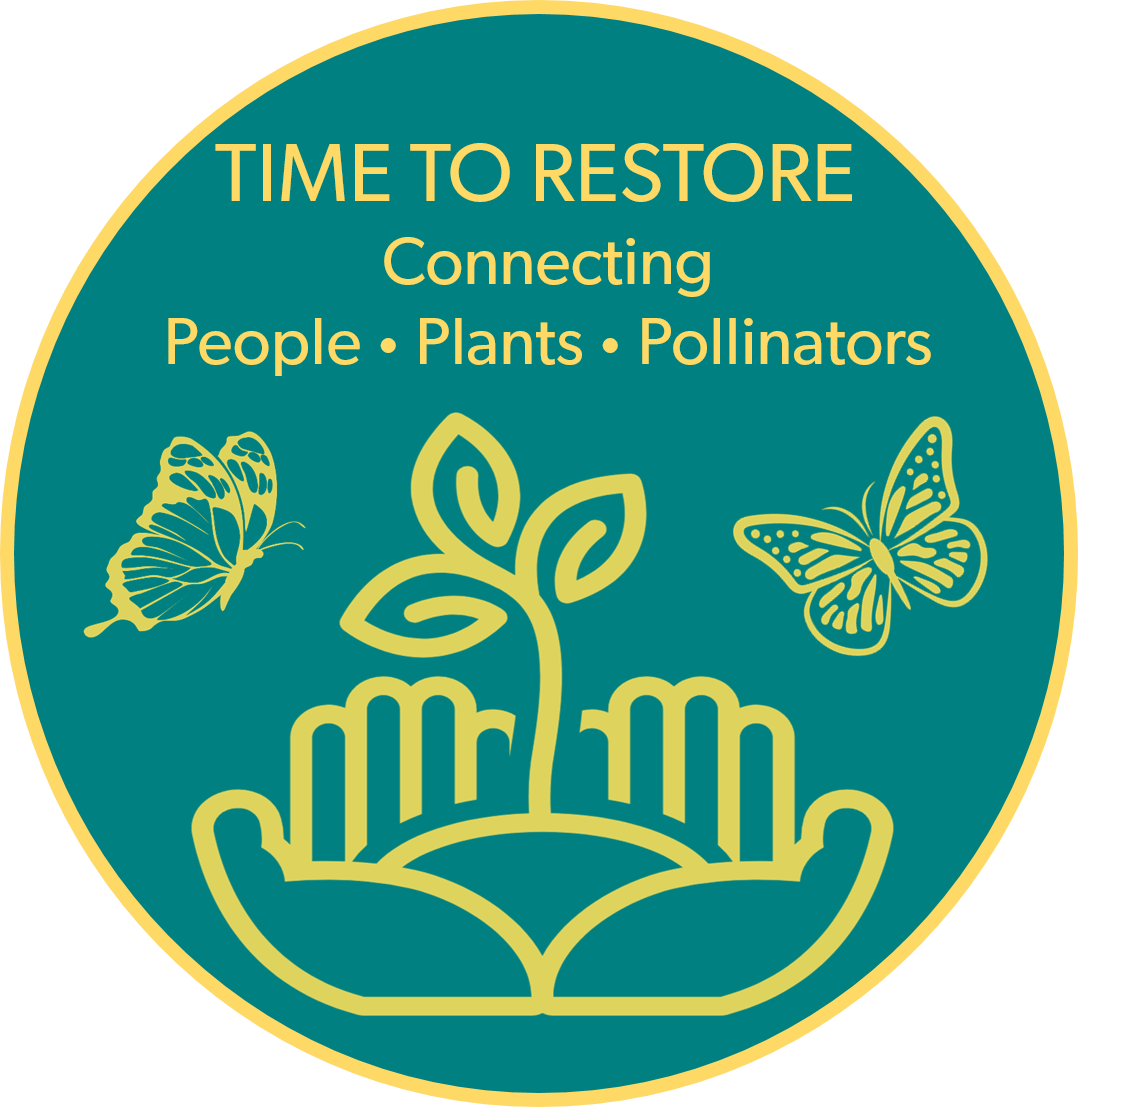 Time to Restore project logo with hands, sapling, and butterflies